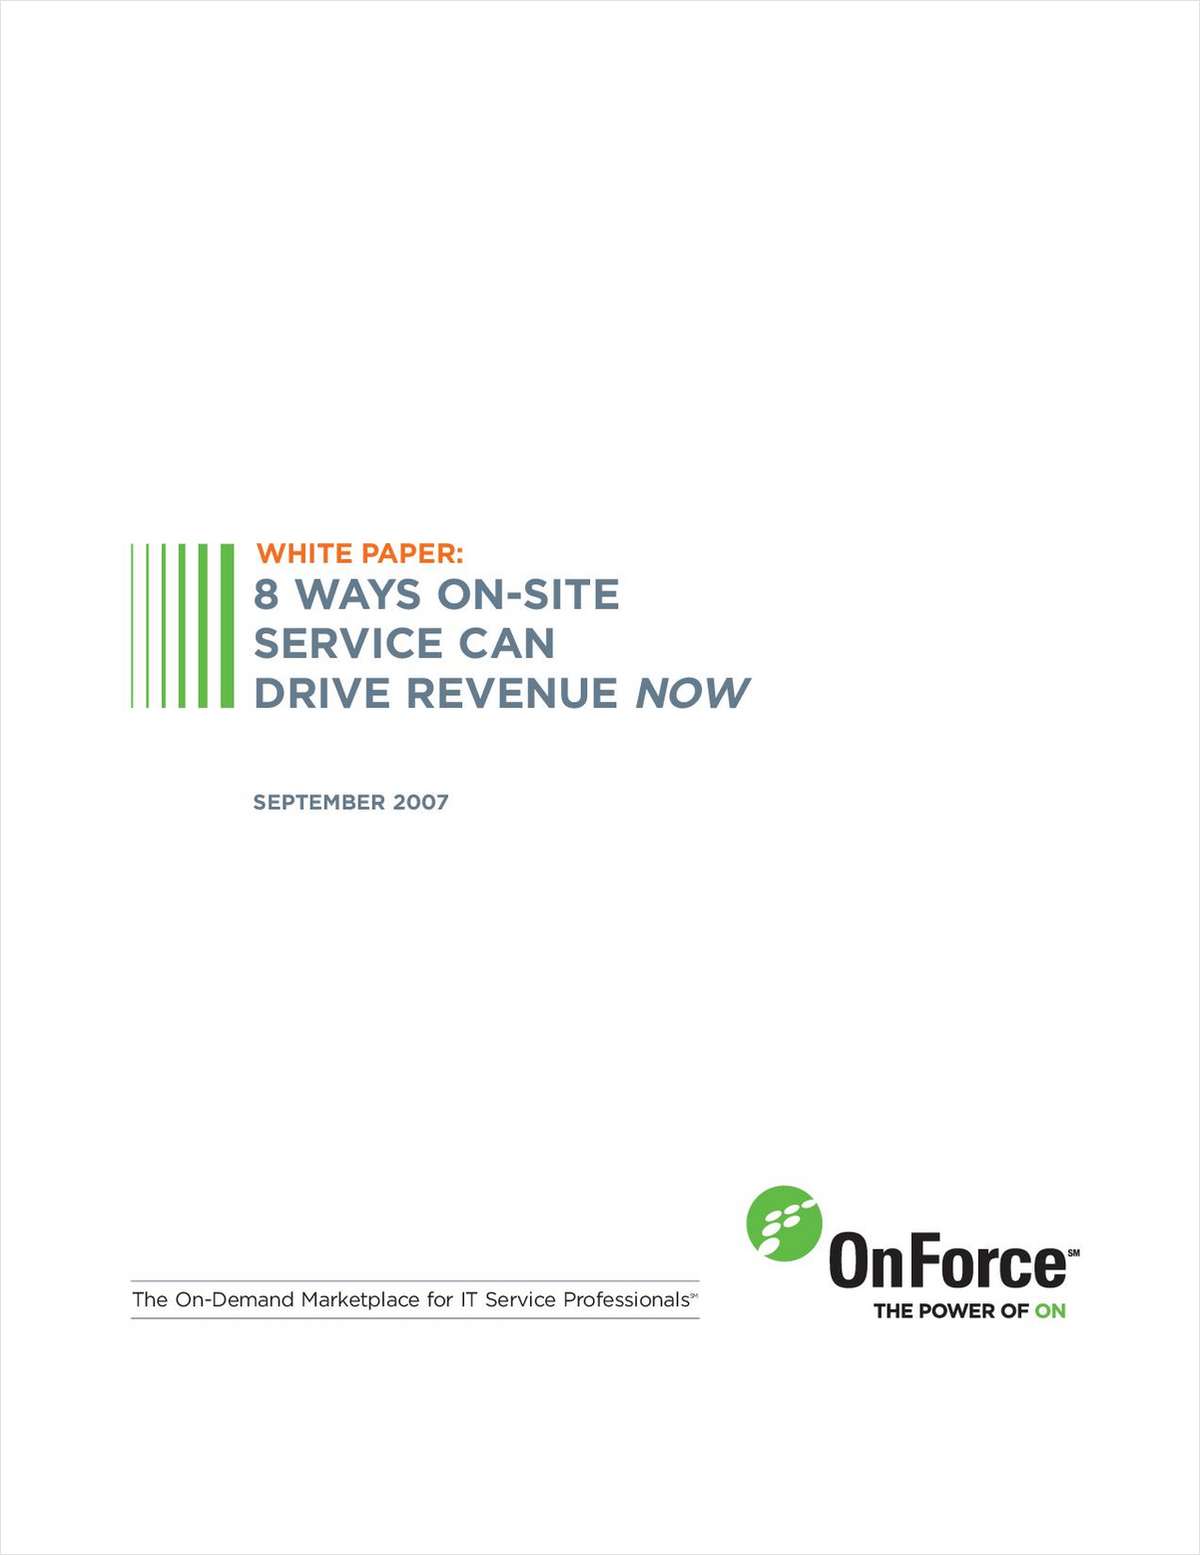 8 Ways On-Site Service Can Drive IT Solution Provider Revenue